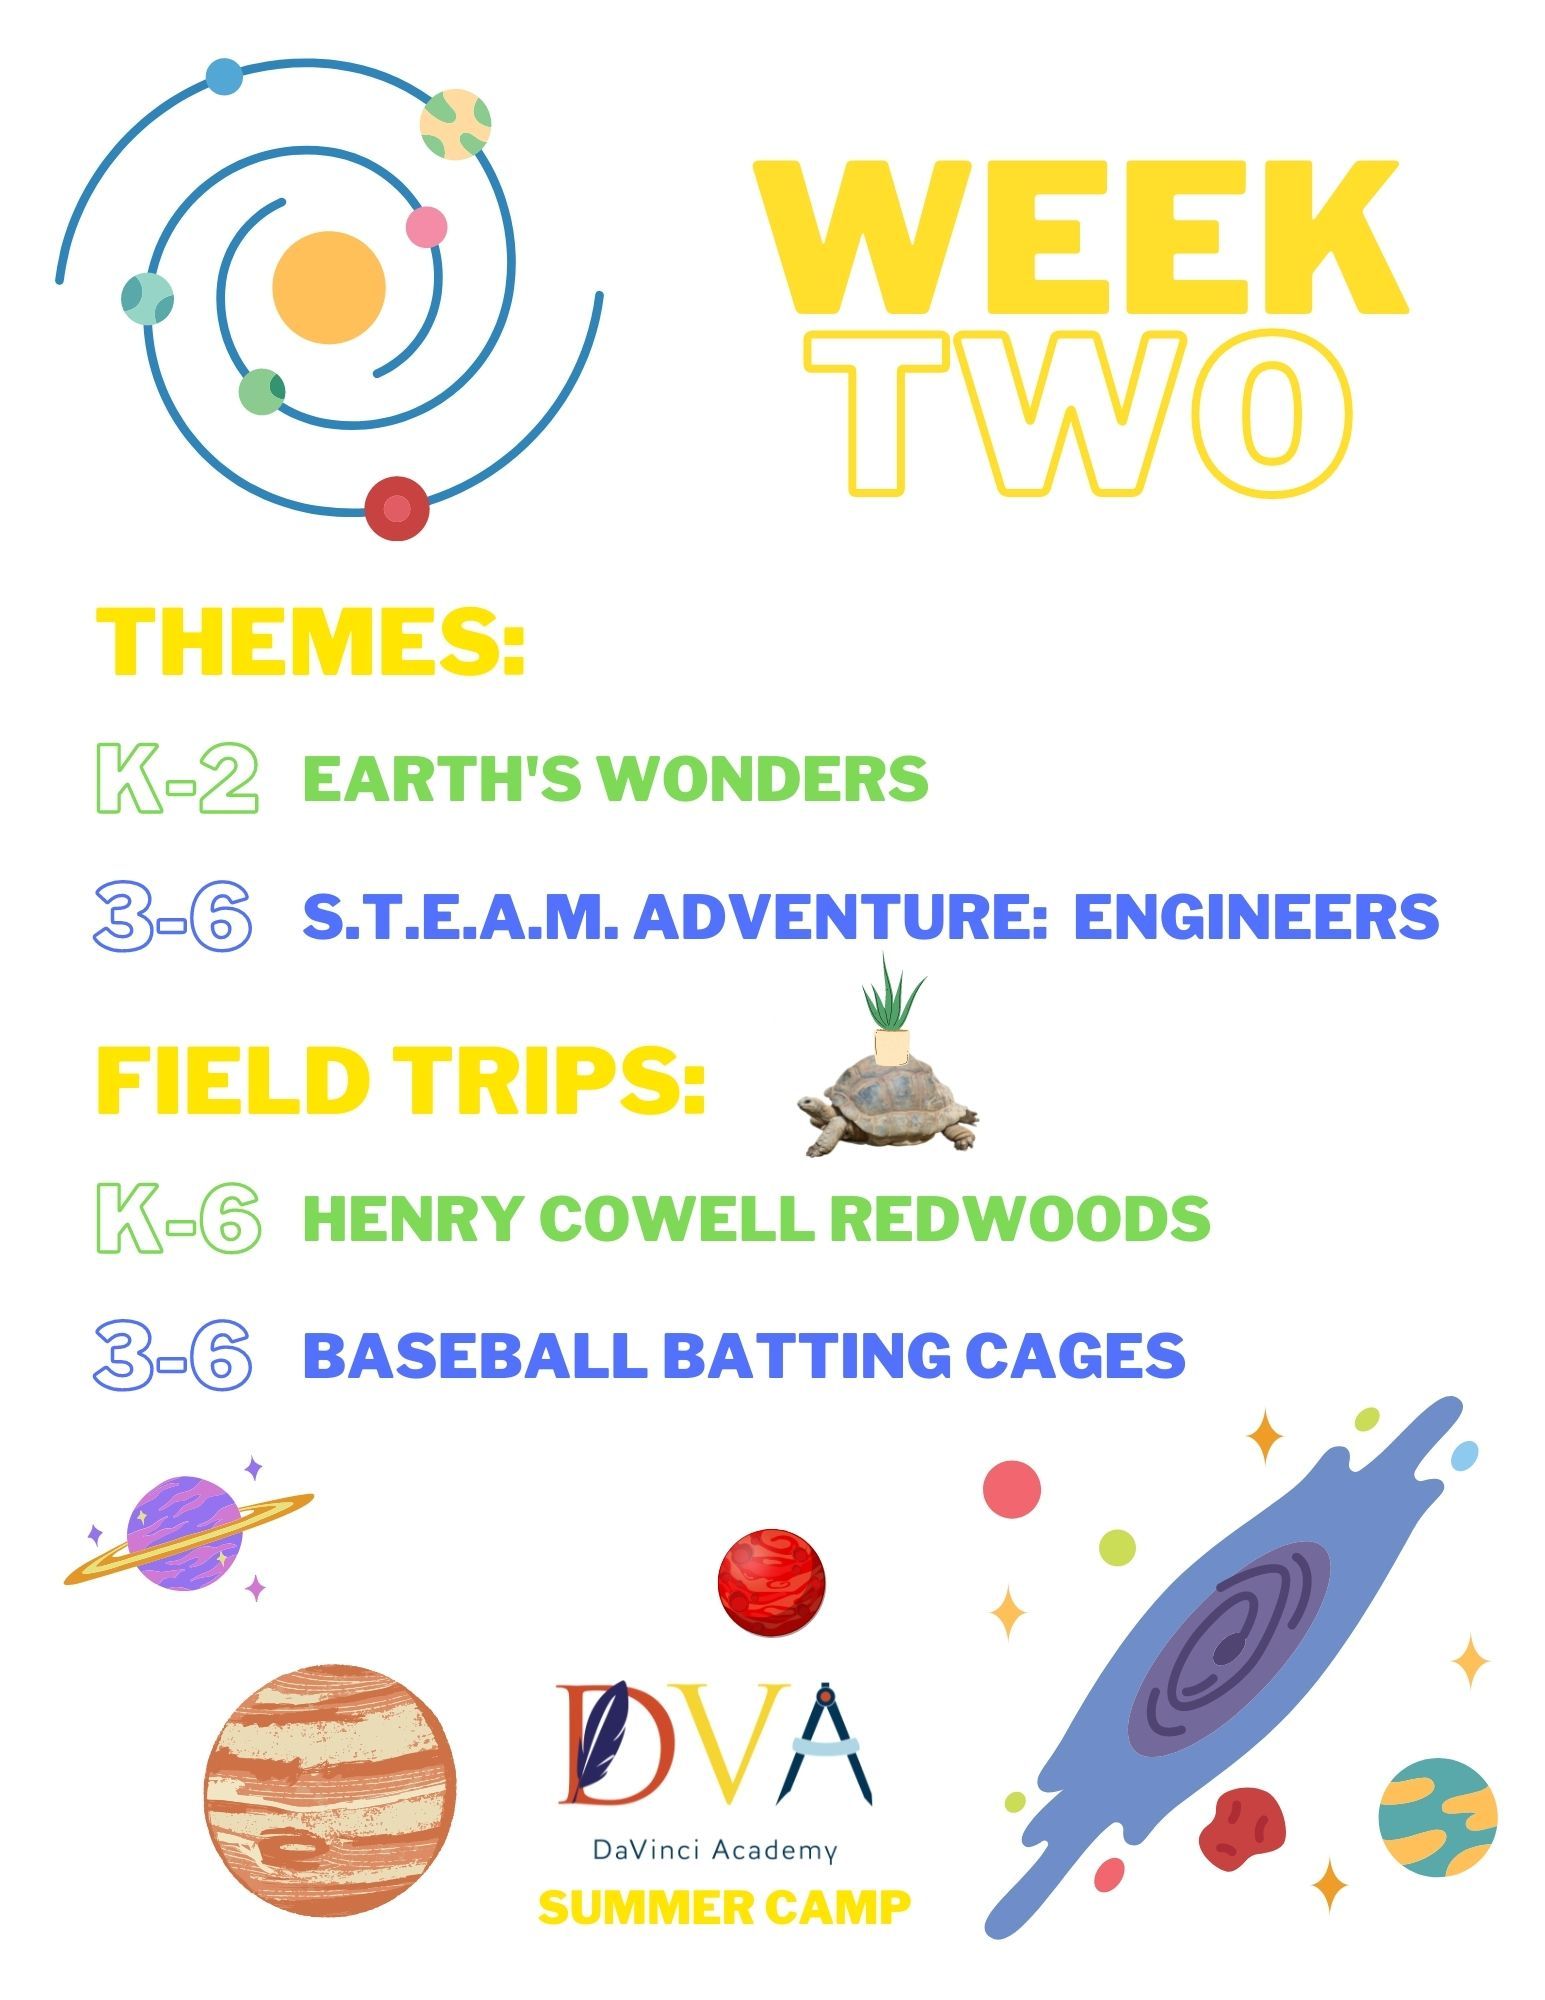 Flyer for Week 2 of DaVinci Summer Camp: themes and field trips